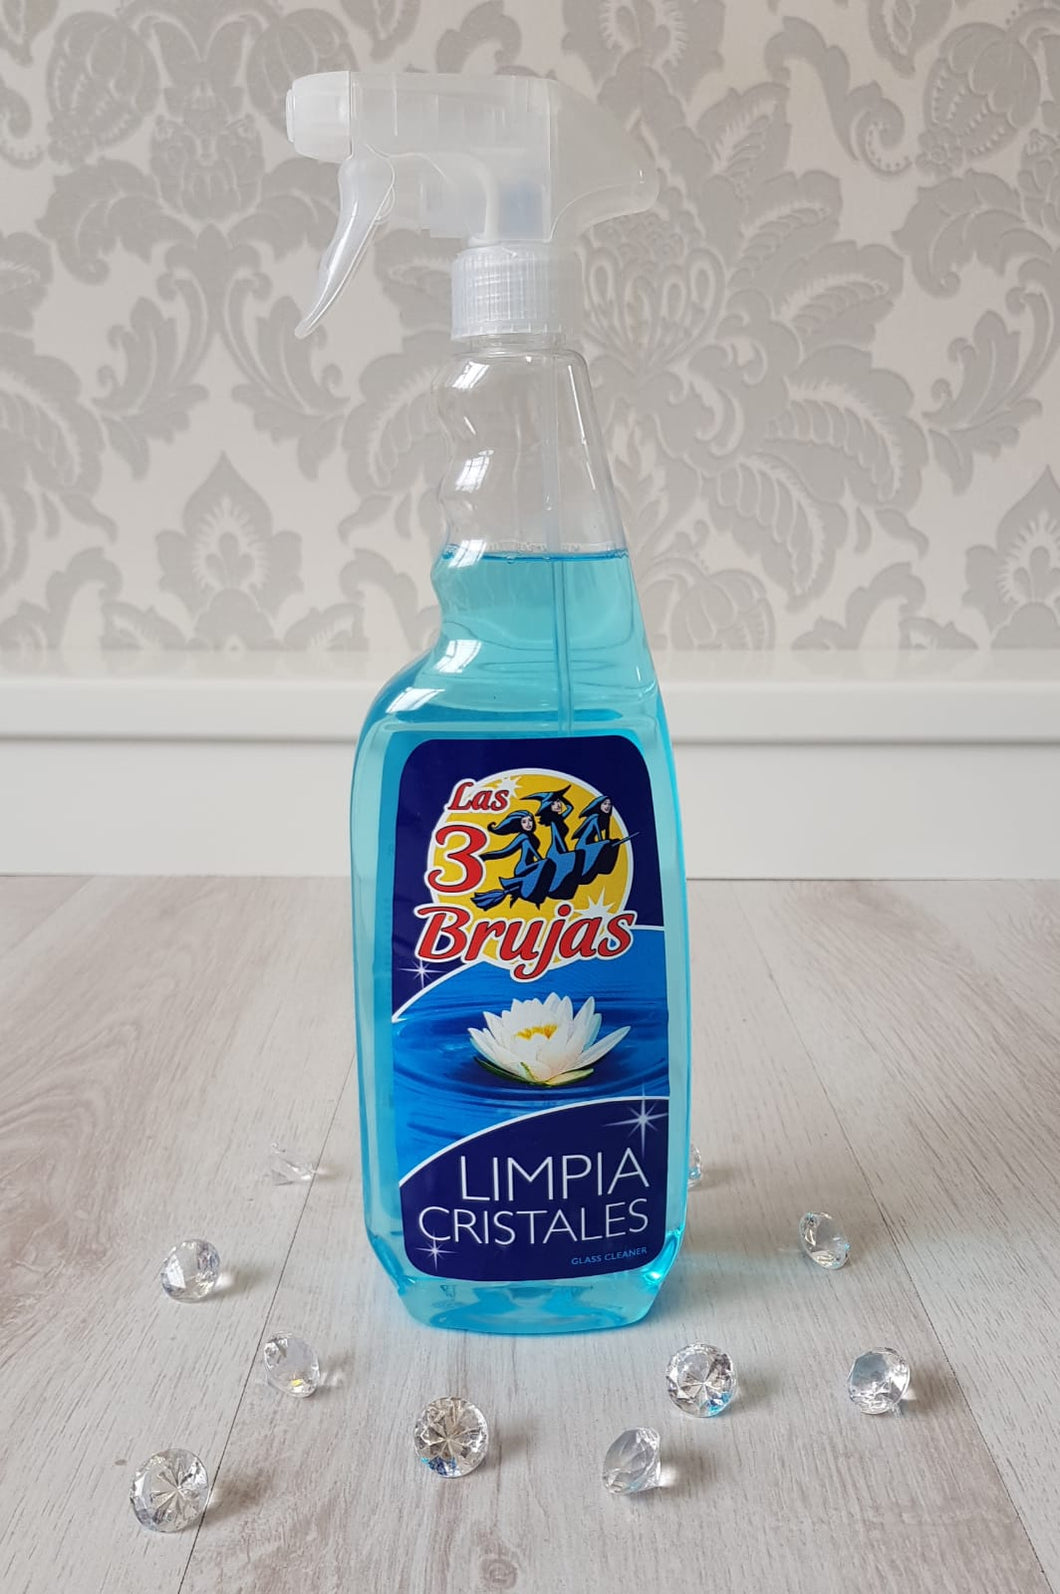 3 Brujas (3 witches) glass and mirror cleaner 750ml💎